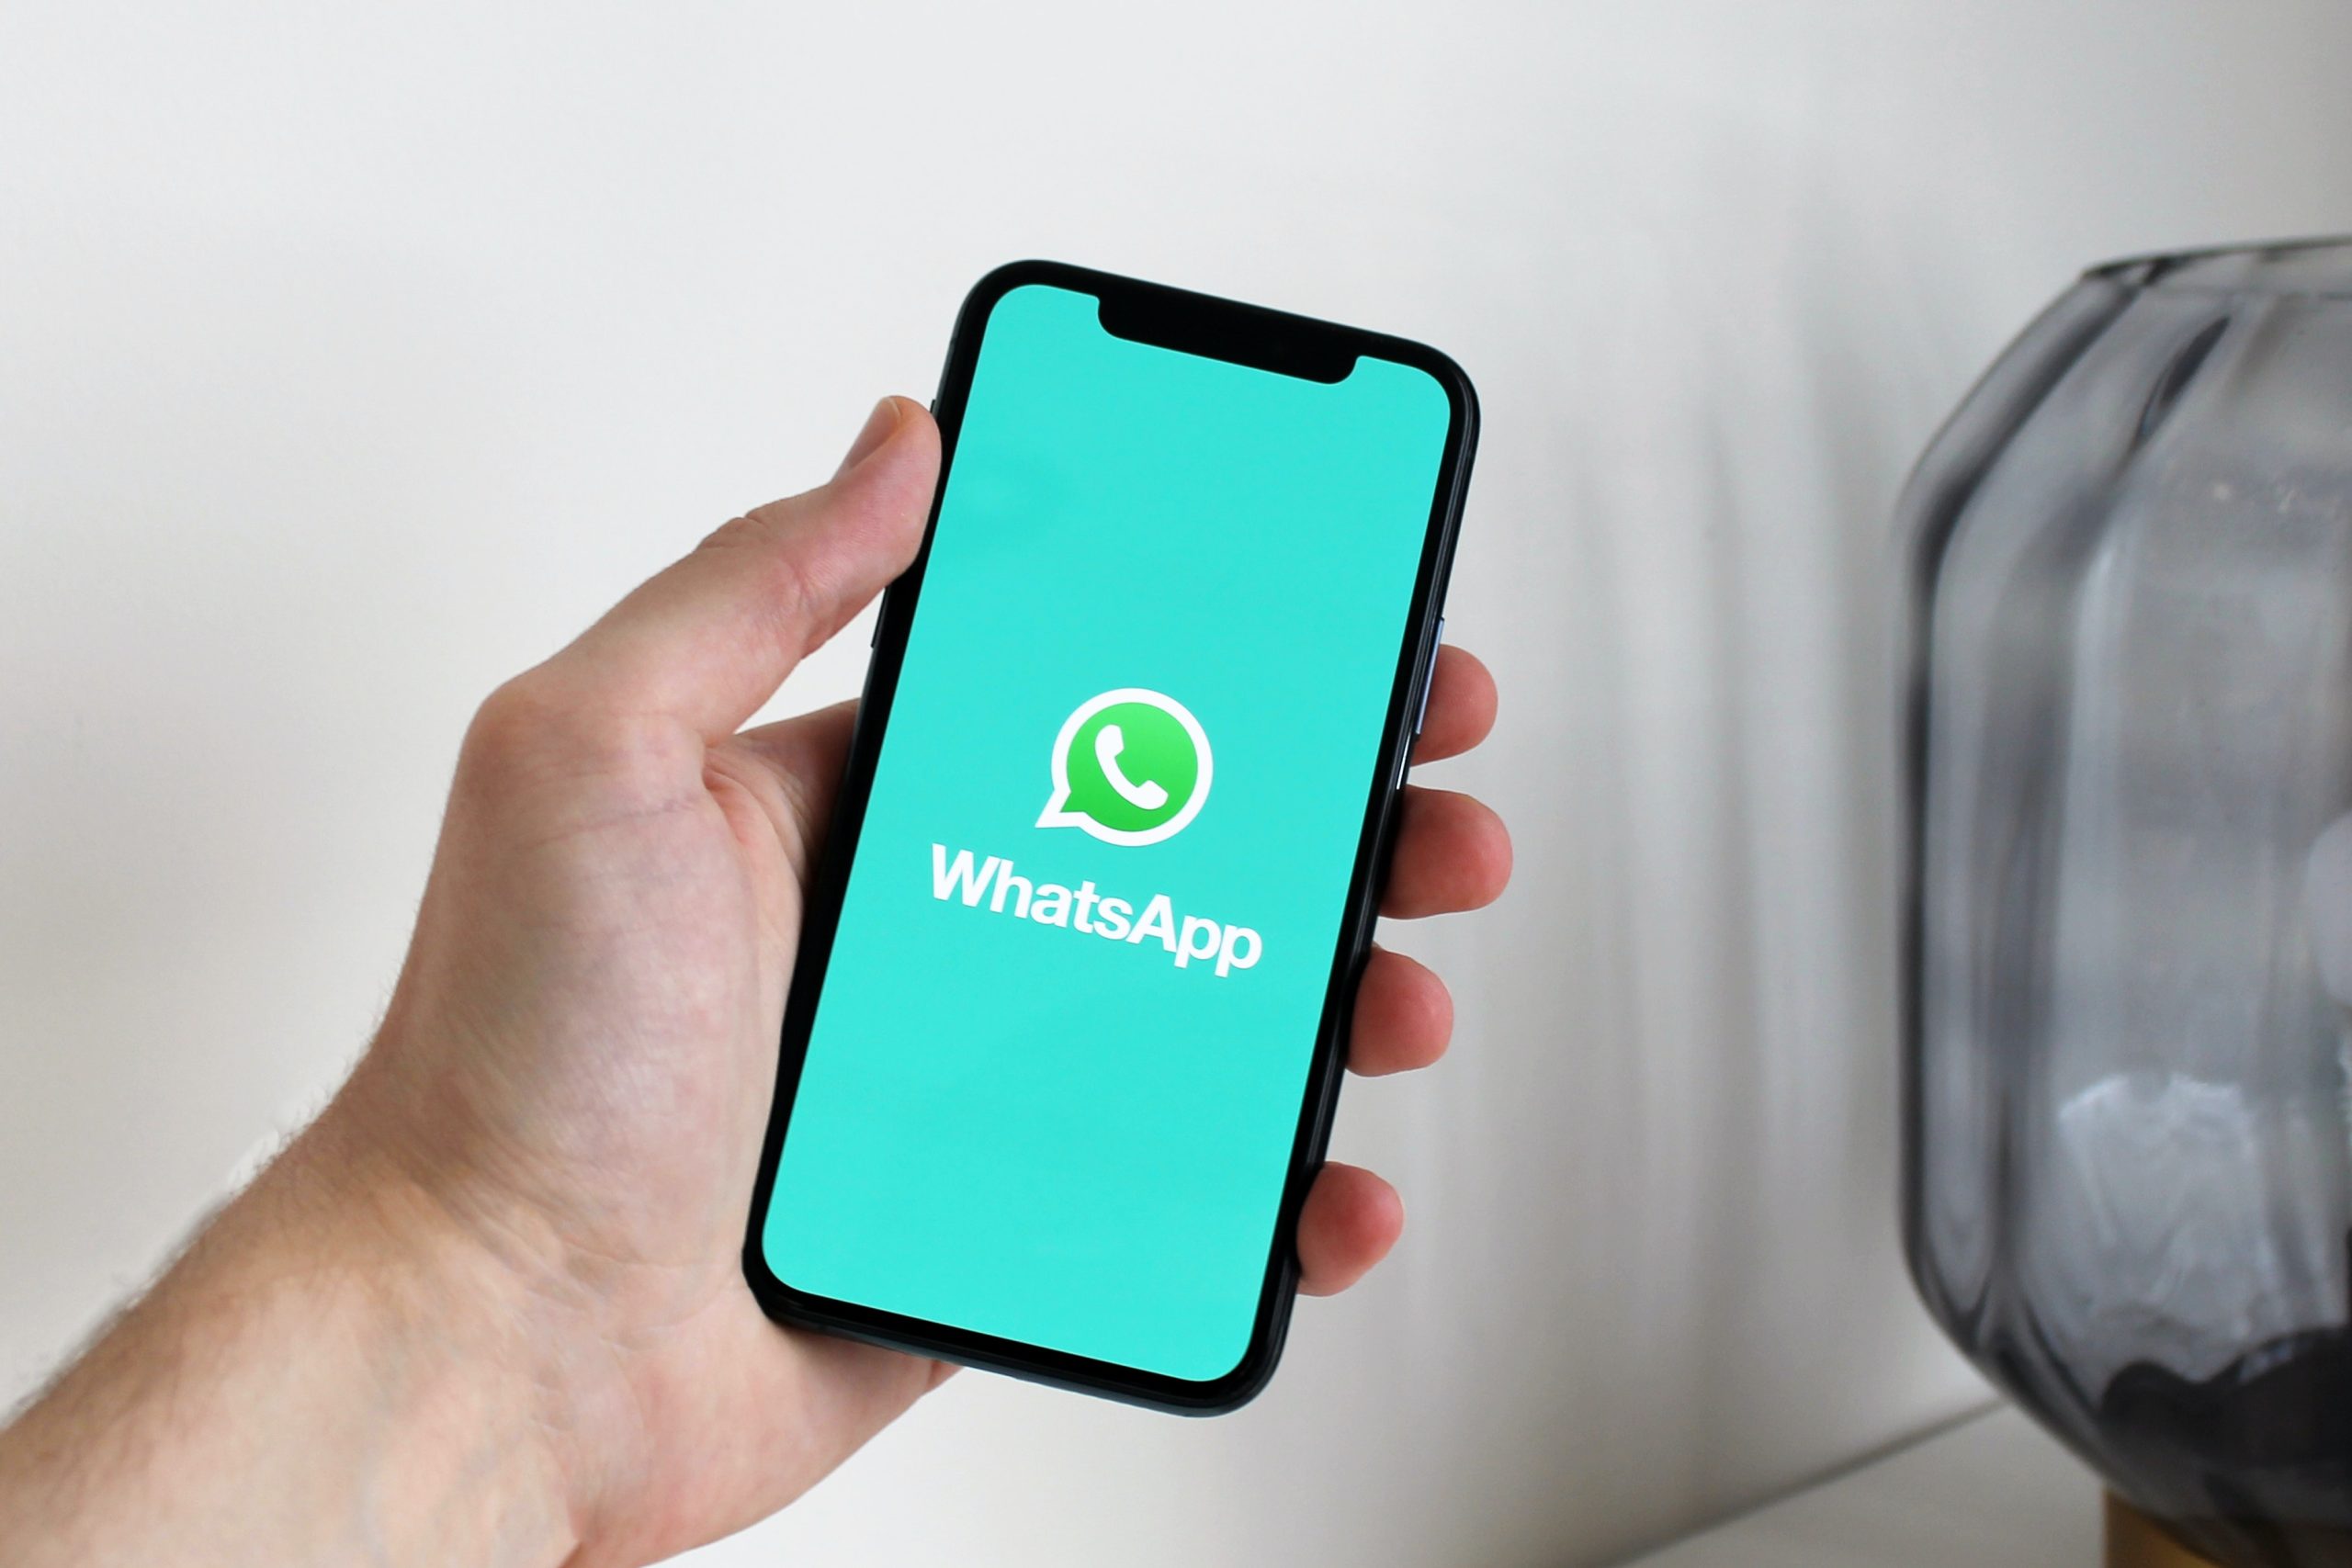 What new feature WhatsApp is working on?